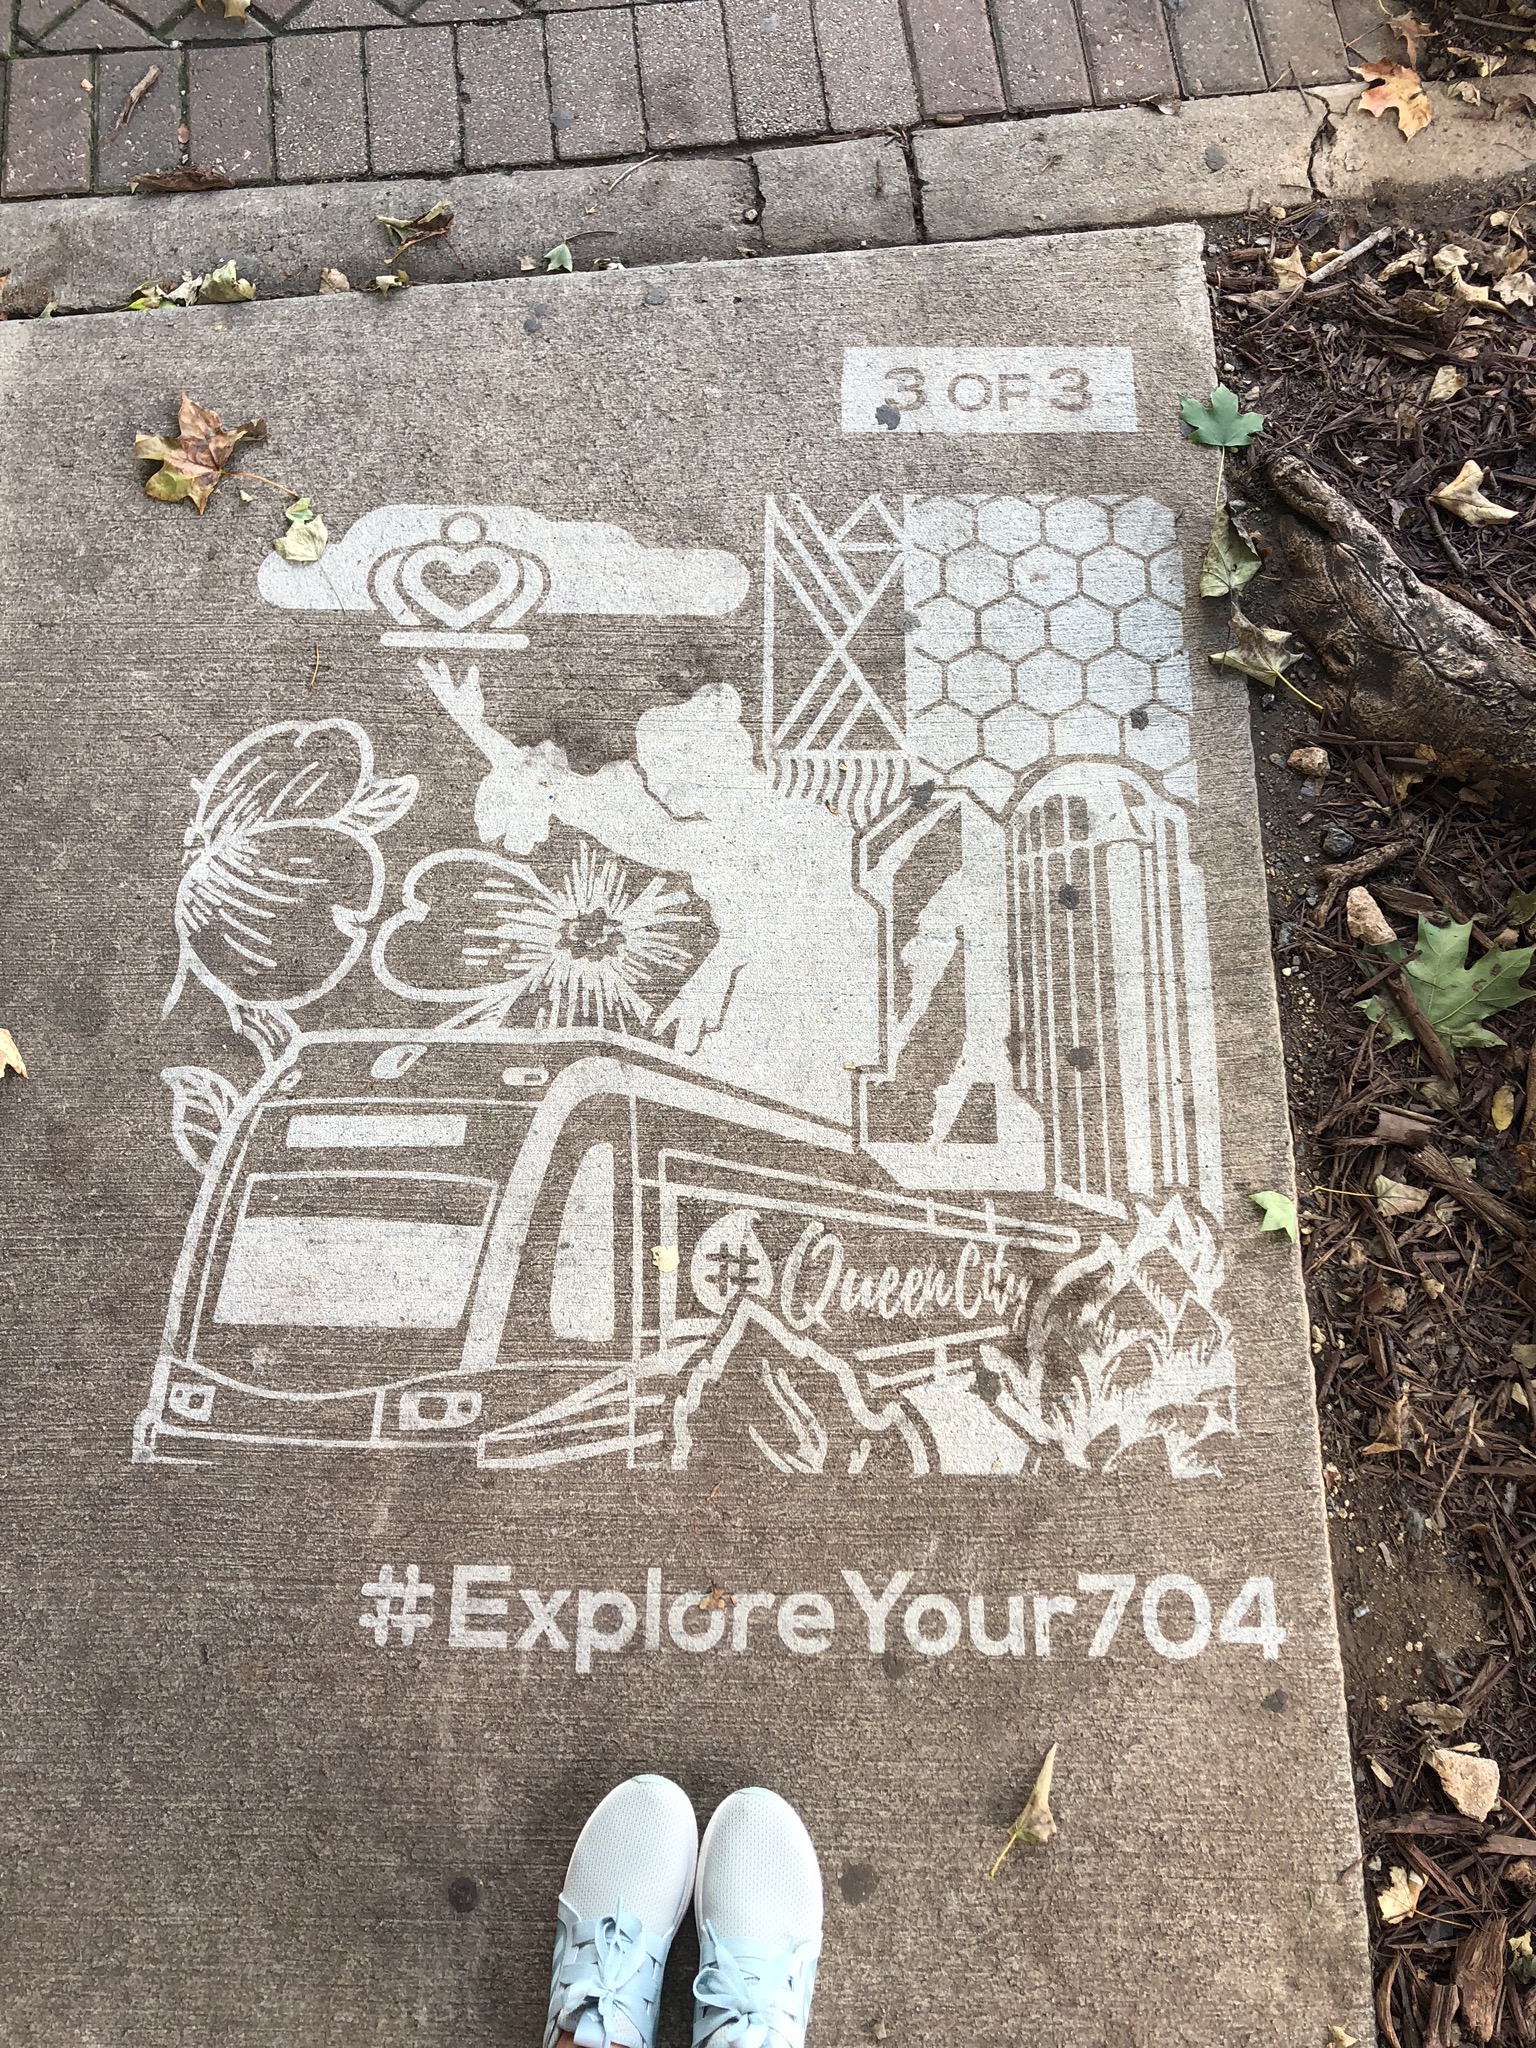 Scavenger Hunt Encourages Charlotte Locals to “Explore Your 704”